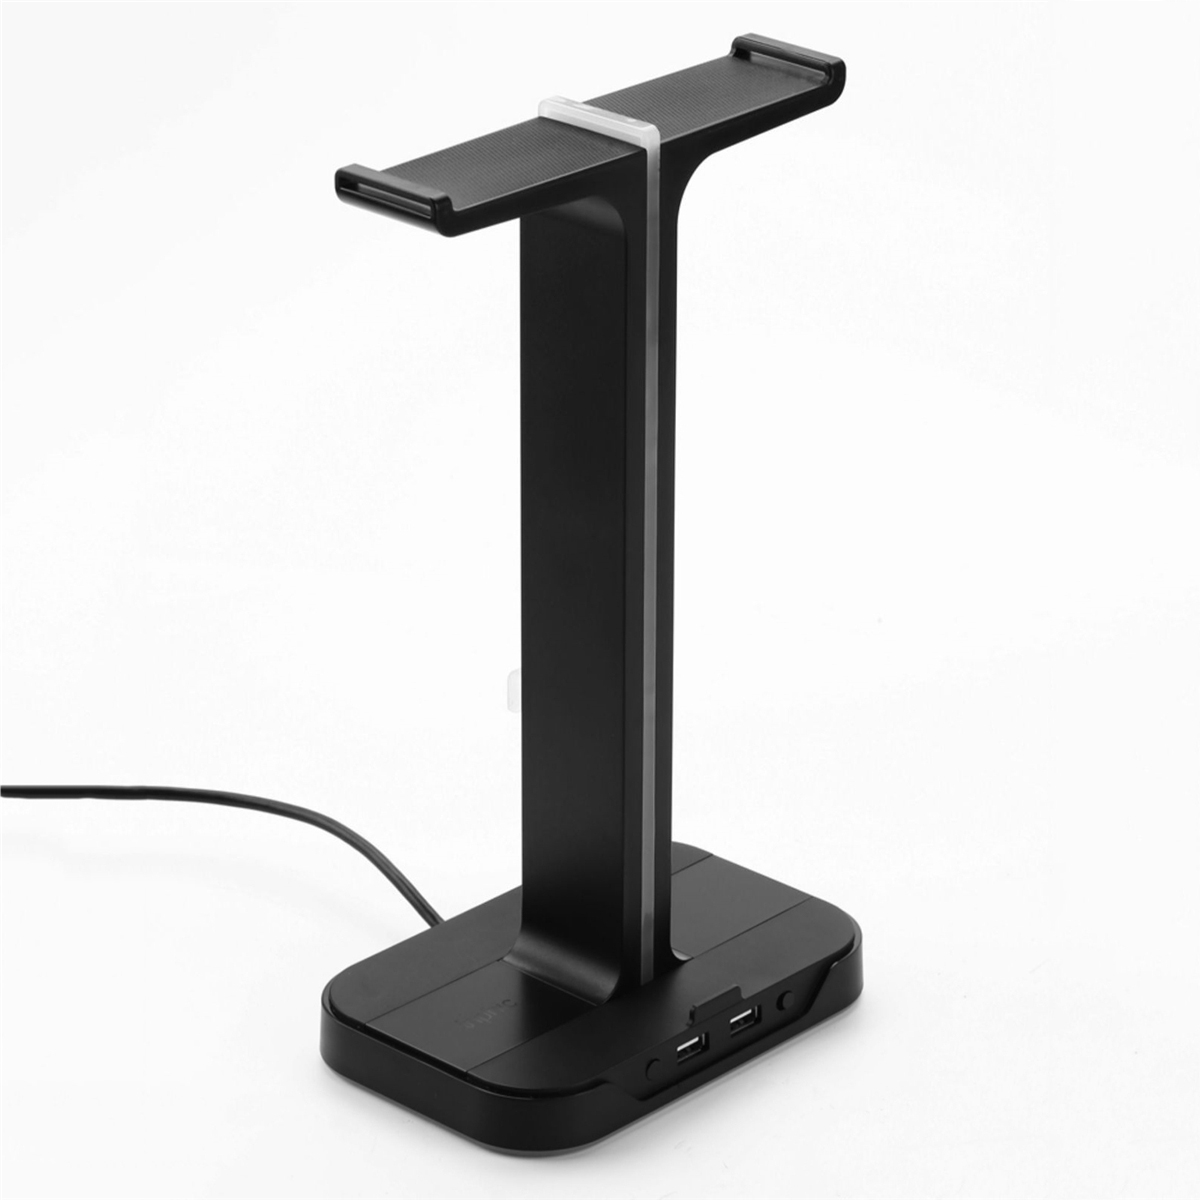 Inphic-H100-Headset-Stand-Dual-USB-Ports-Colorful-Light-Base-Headphone-Hanger-Headset-Mount-Holder-O-1742022-12